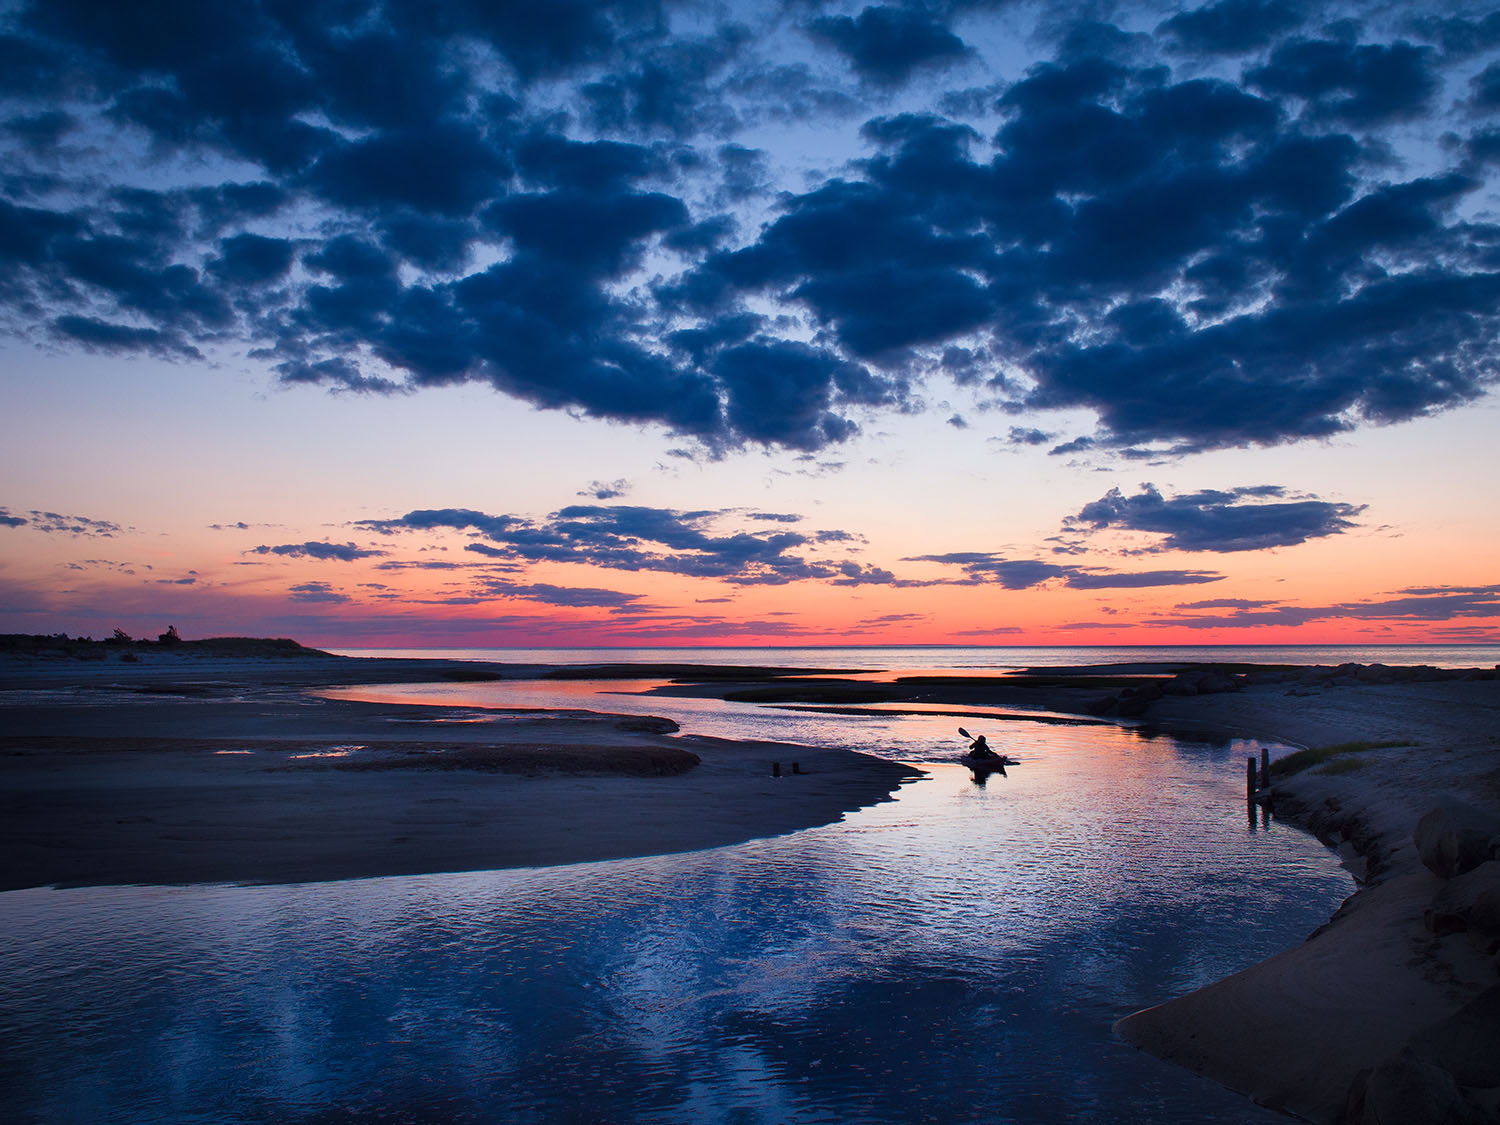 TRAVEL GUIDE: CAPE COD VACATION, 48 HOURS TRIP IDEAS - Furthermore